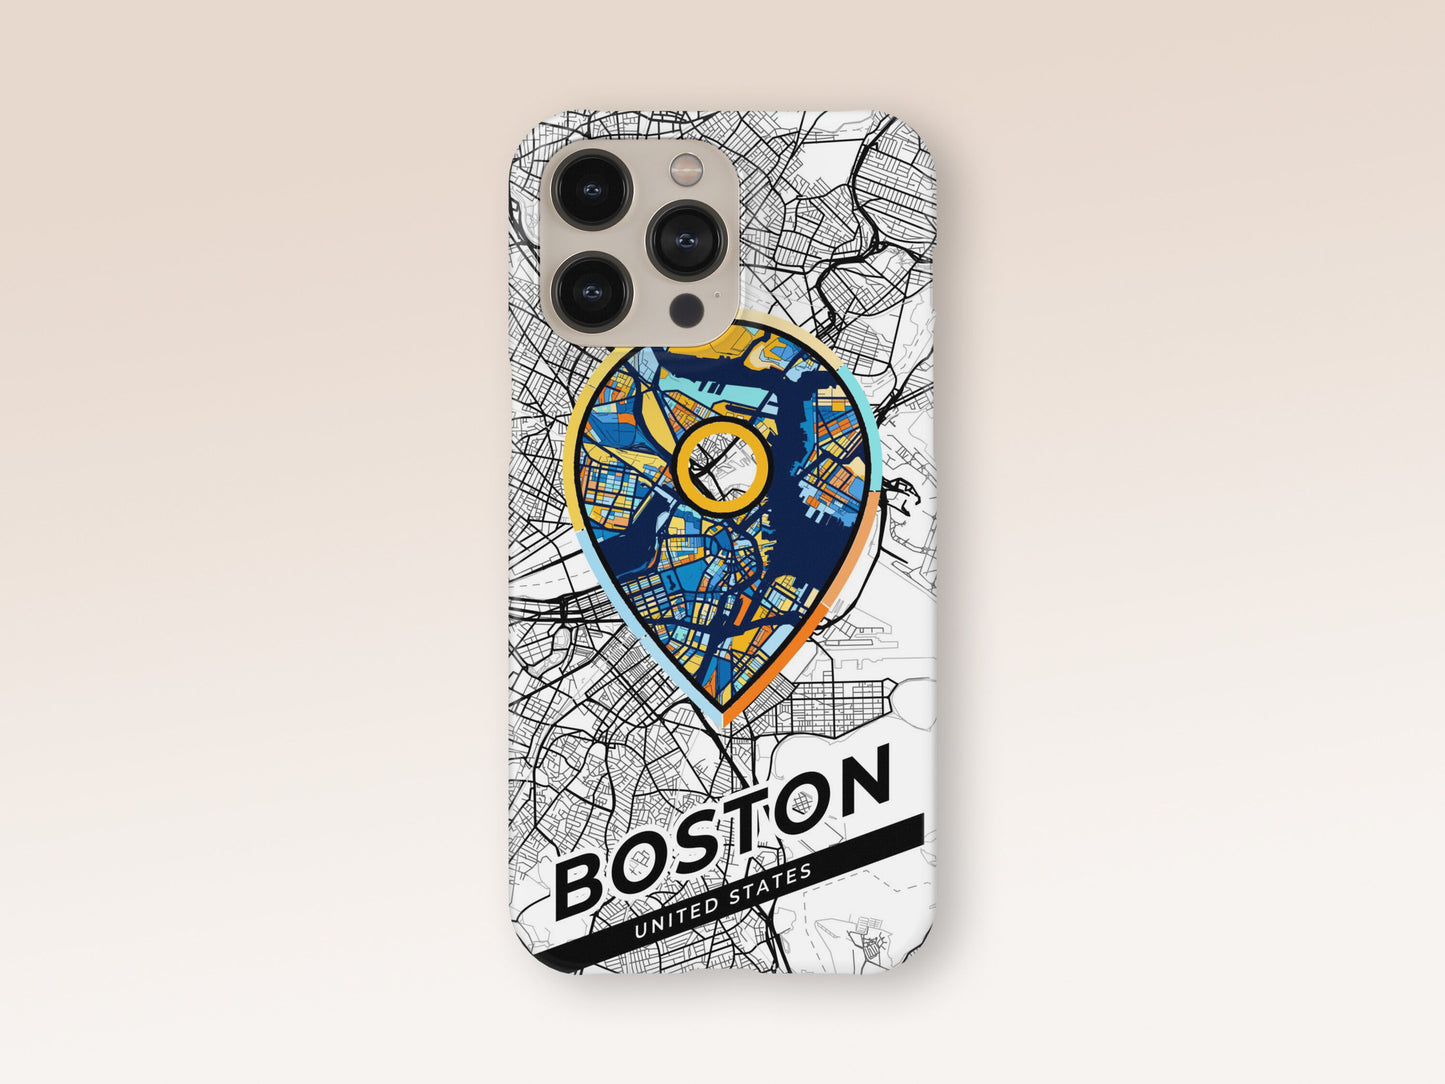 Boston Massachusetts slim phone case with colorful icon. Birthday, wedding or housewarming gift. Couple match cases. 1